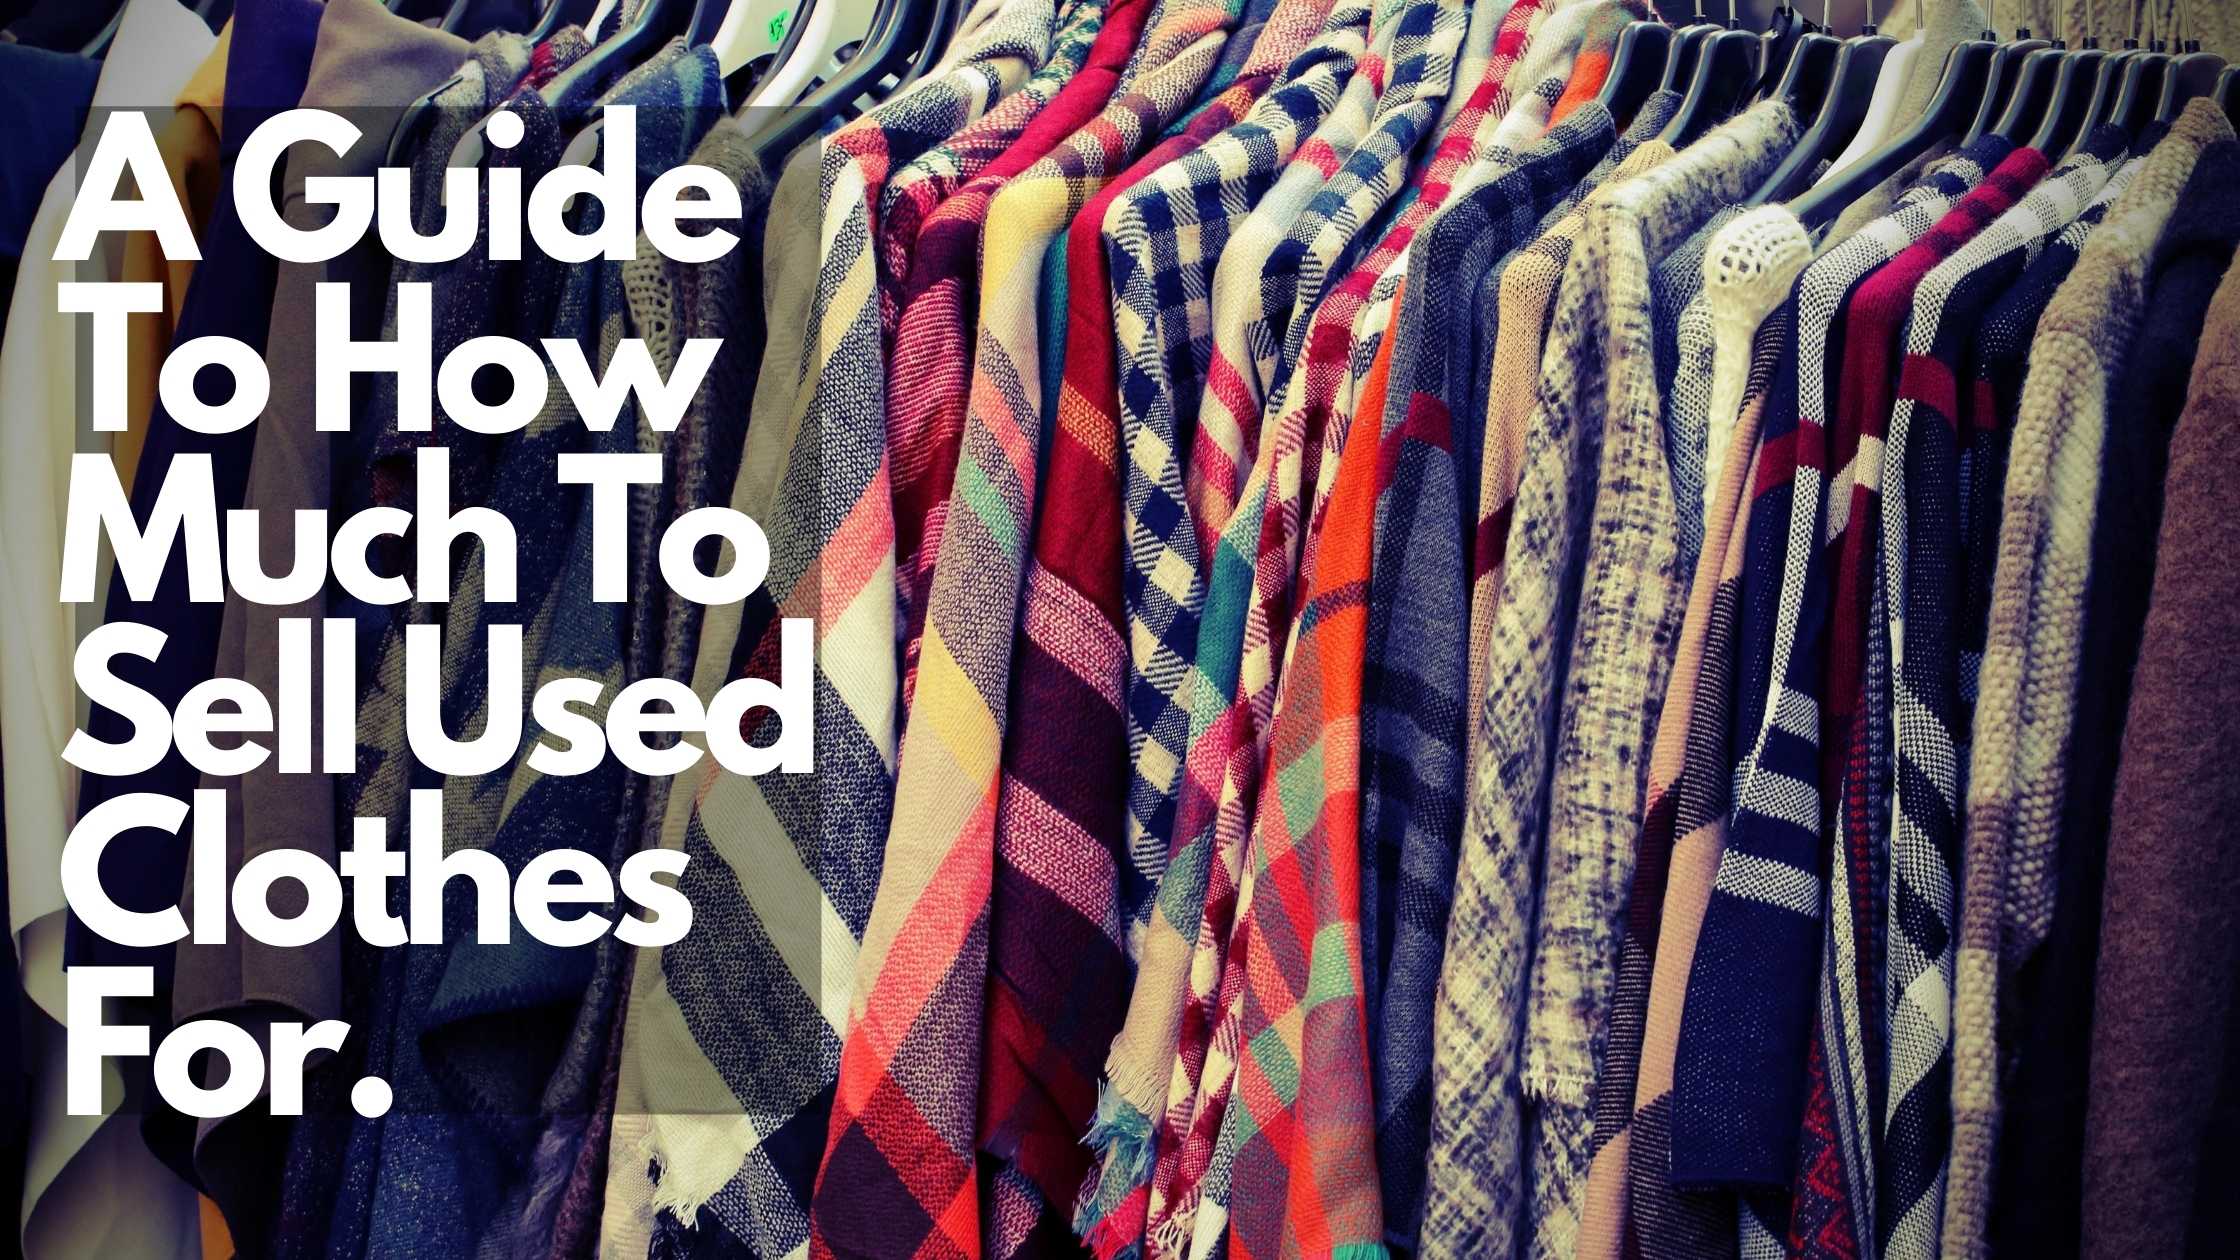 A Guide to How Much to Sell Used Clothes For